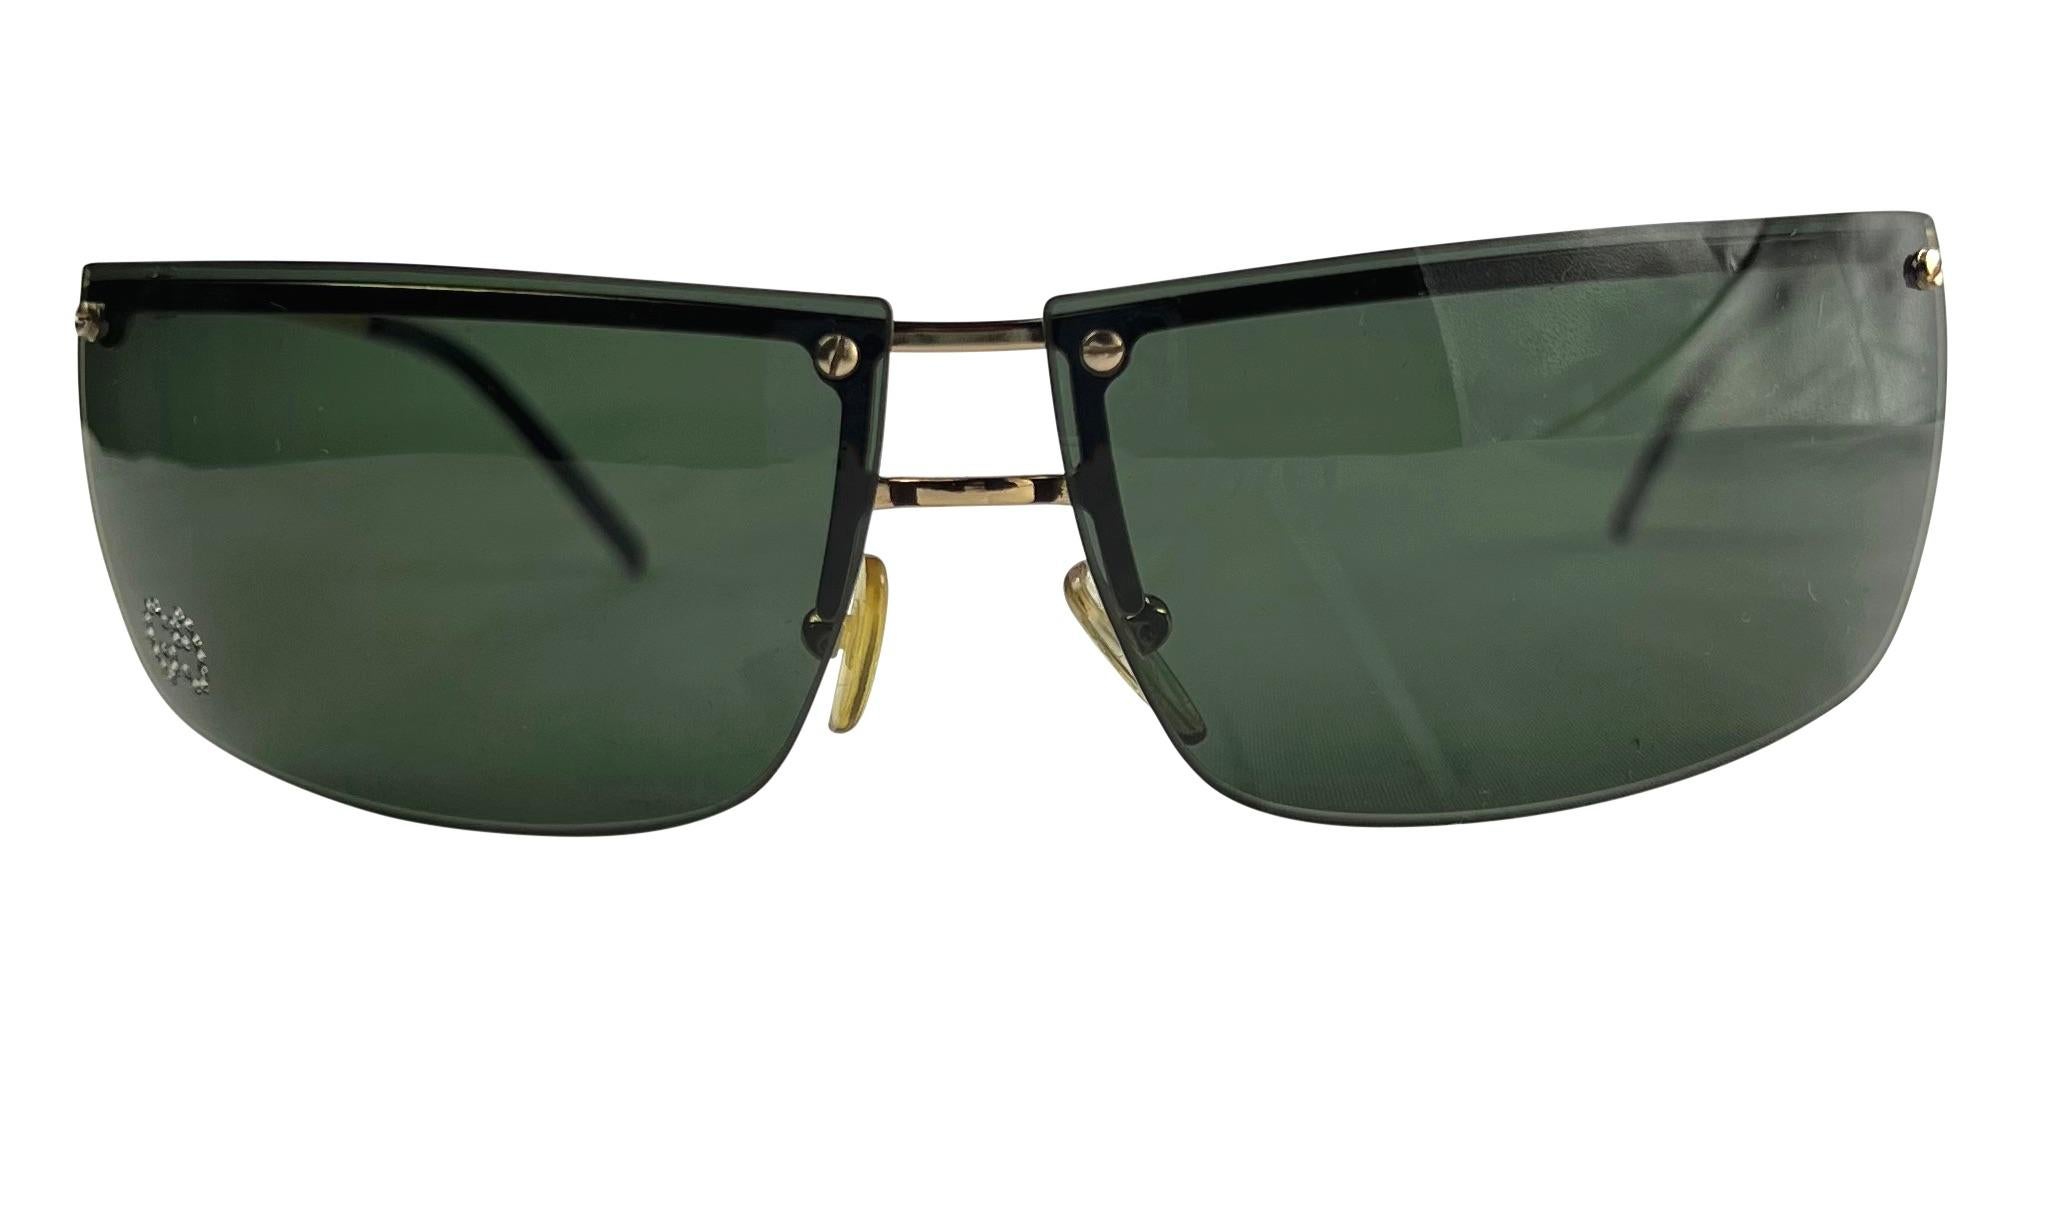 Presenting a fabulous pair of golf-tone rimless Gucci sunglasses, designed by Tom Ford. From the early, these ultra-chic sunglasses are the perfect addition to any collection and are made complete with a rhinestone 'GG' logo on the lens.